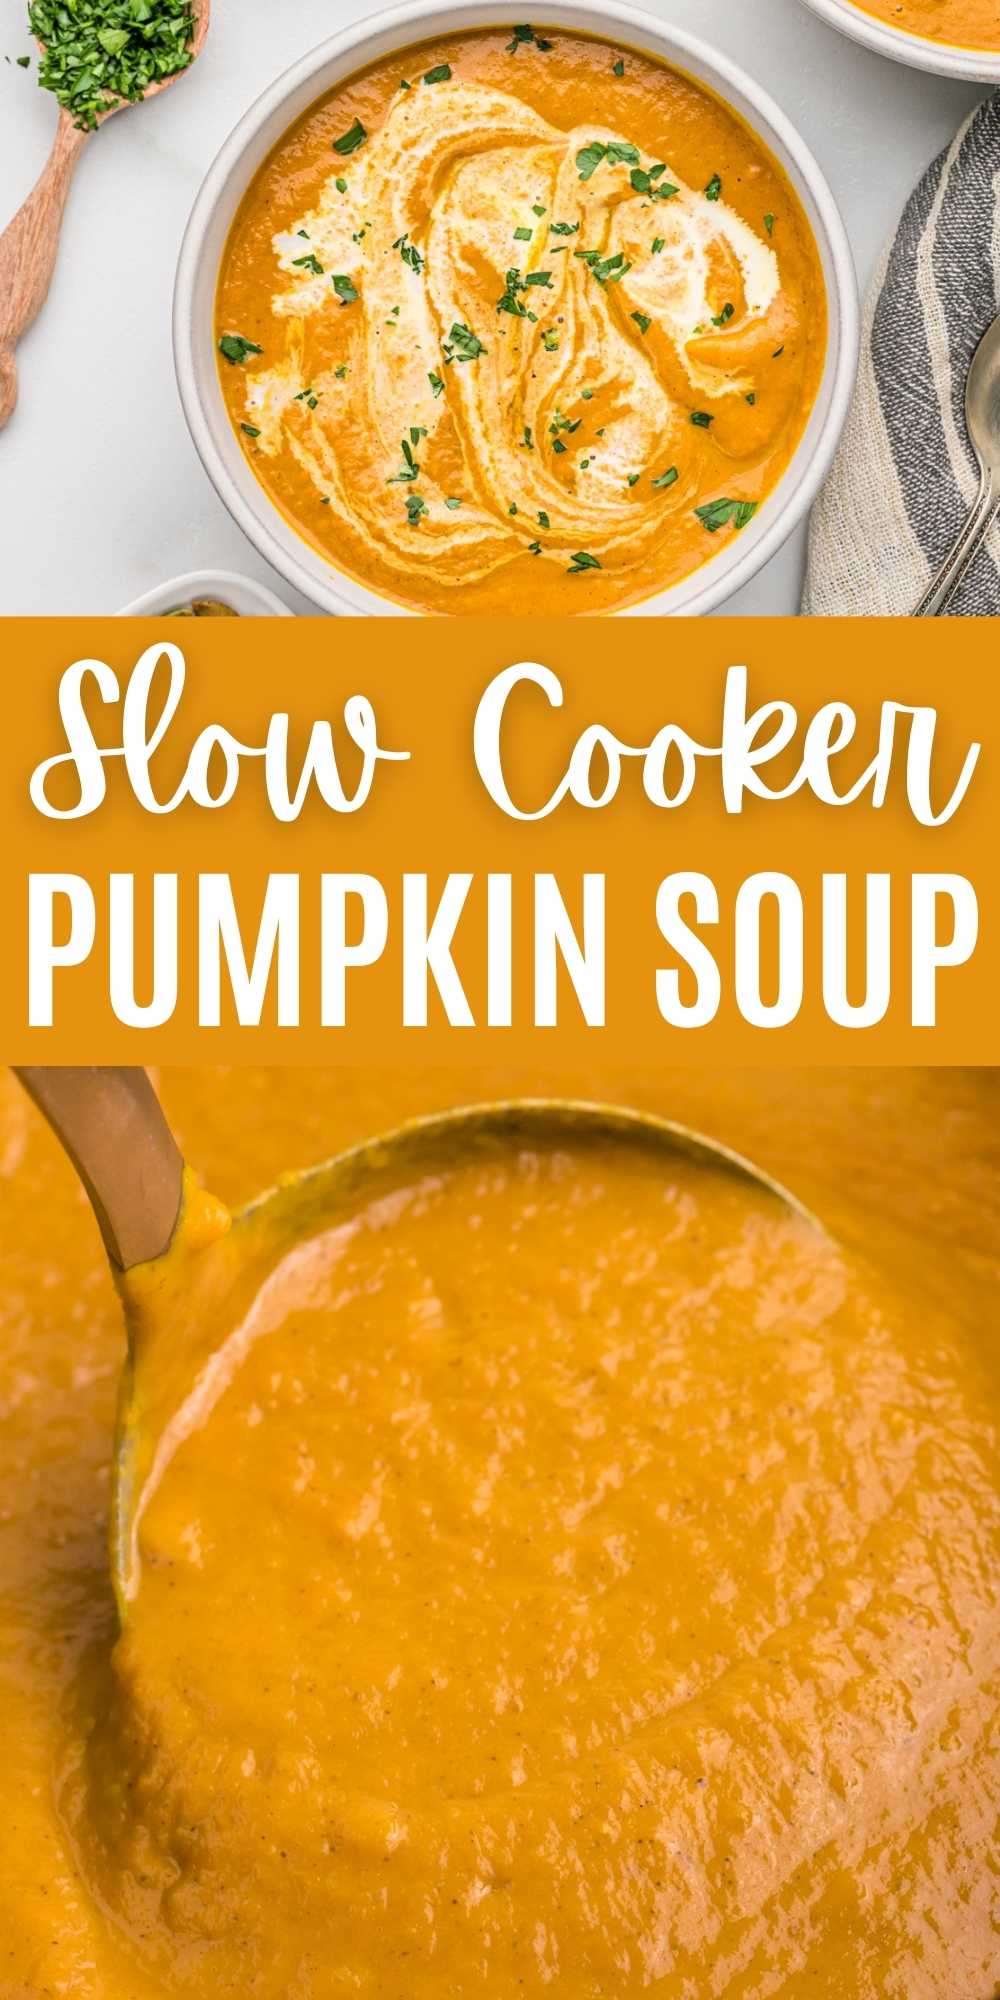 If you love pumpkin flavored recipes, then you must try this Slow Cooker Pumpkin Soup. It is rich, creamy and loaded with delicious flavor. This soup ends with creamy coconut milk to make an easy pumpkin soup. #eatingonadime #pumpkinsoup #slowcookerrecipe